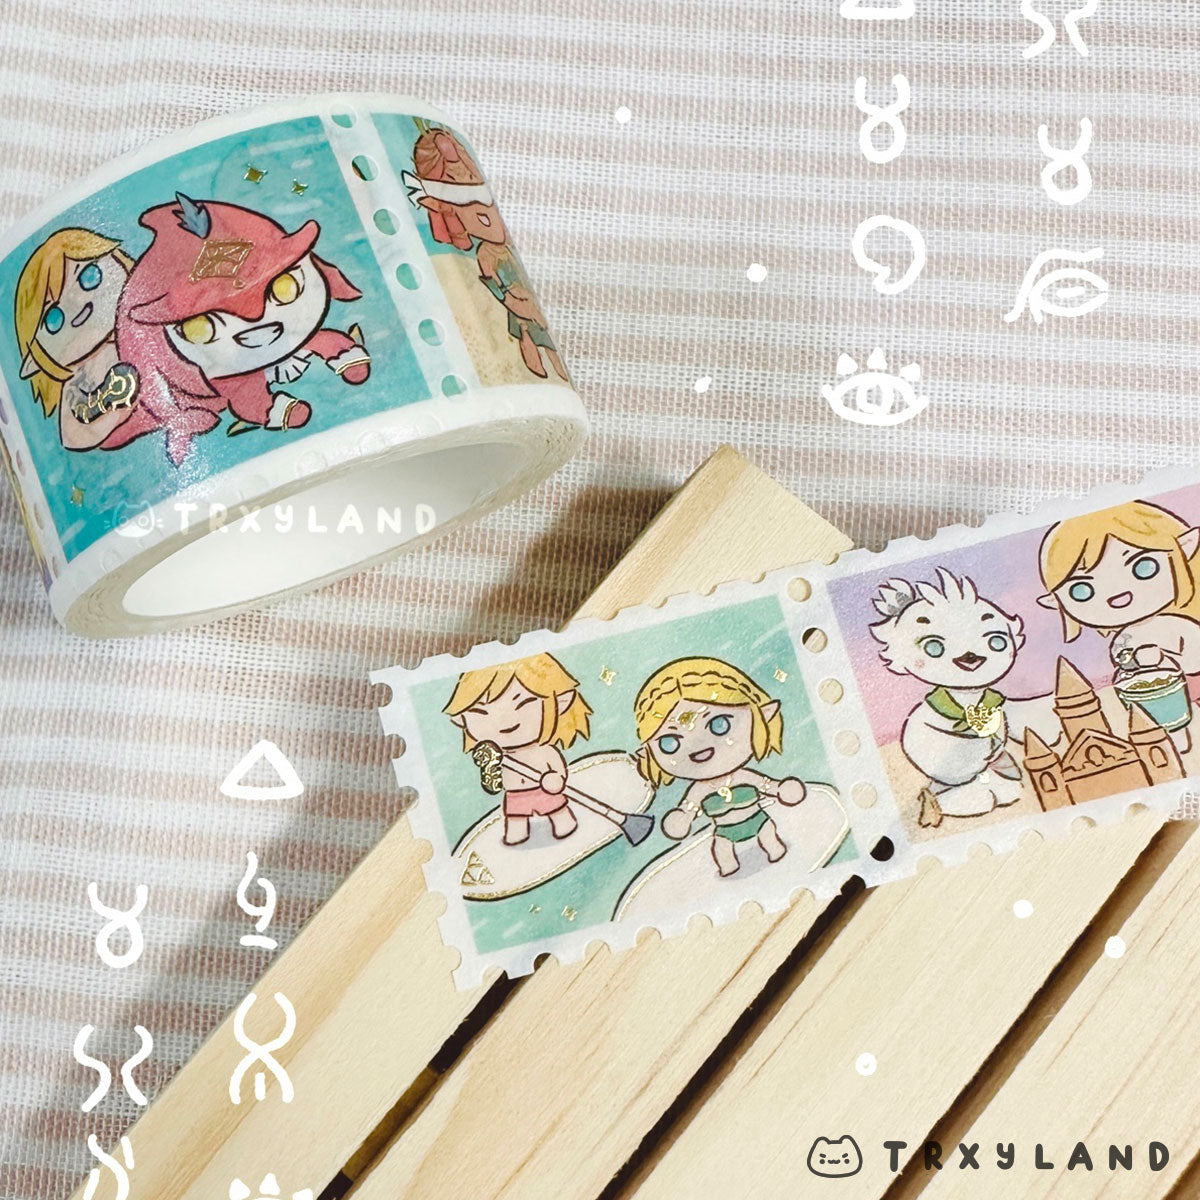 Link's Vacation Stamp Washi Tape